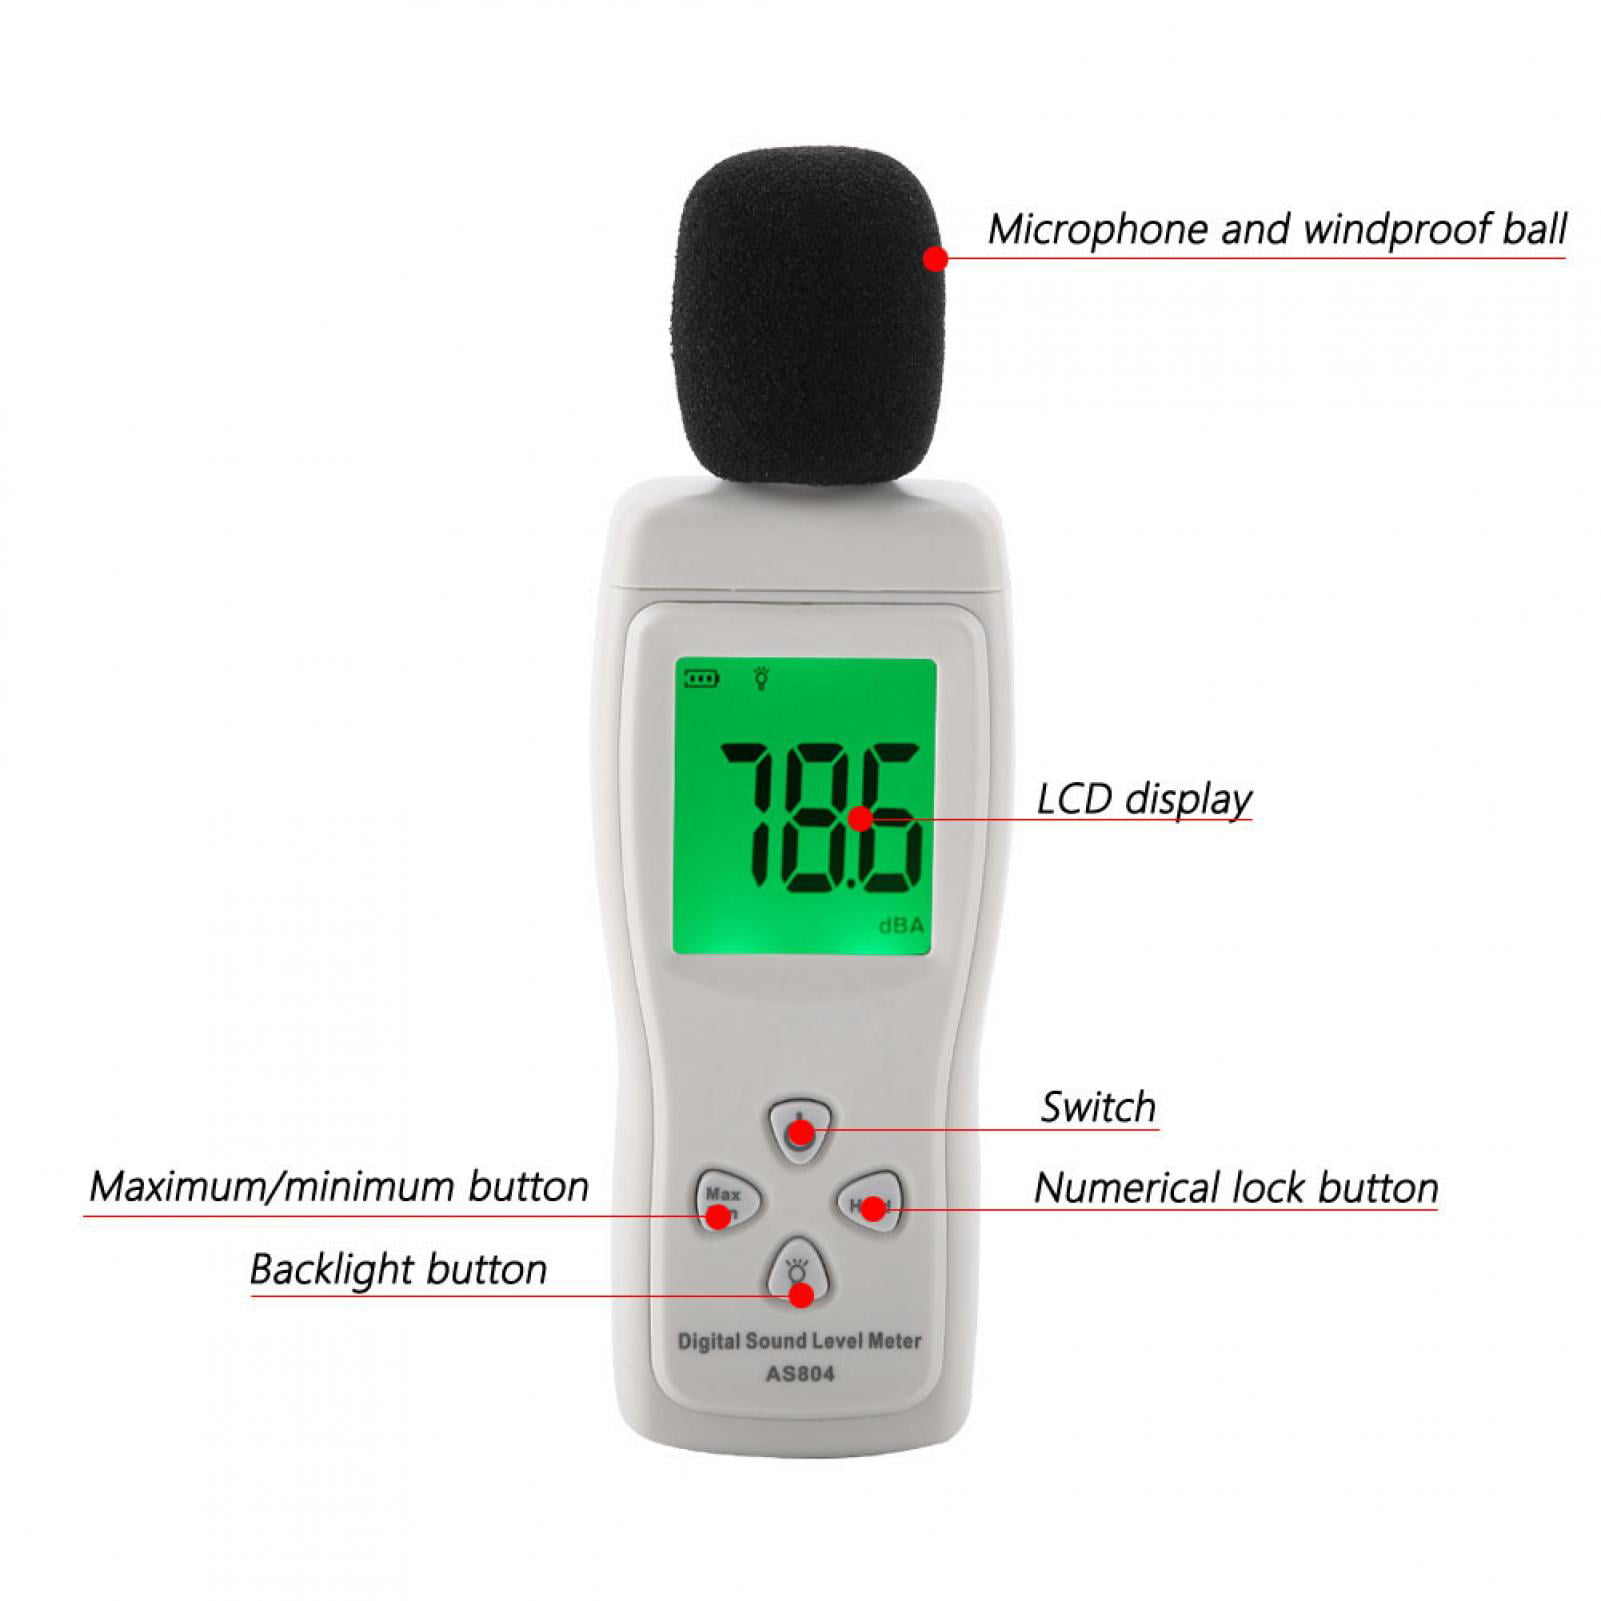 Sound Level Meter Sound Level Meter Digital Sound Level Meter AS804 Digital Sound Level Meter Test Monitor 30-130dBA Noise Tester for Automotive Noise Exposure Industrial Equipment etc